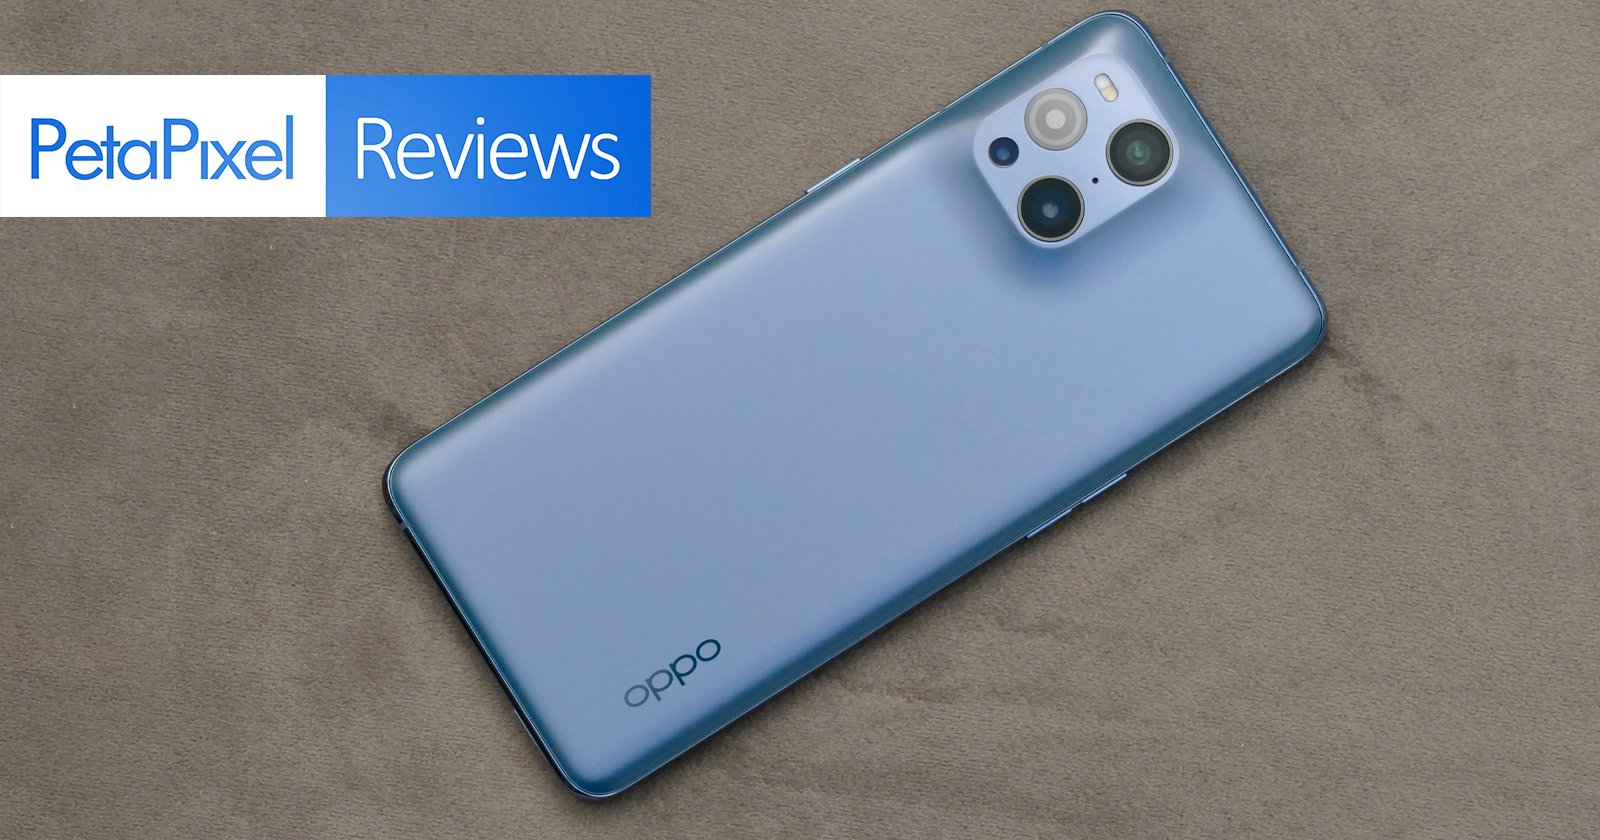 OPPO Find X3 Pro review: Form and function but not quite flawless